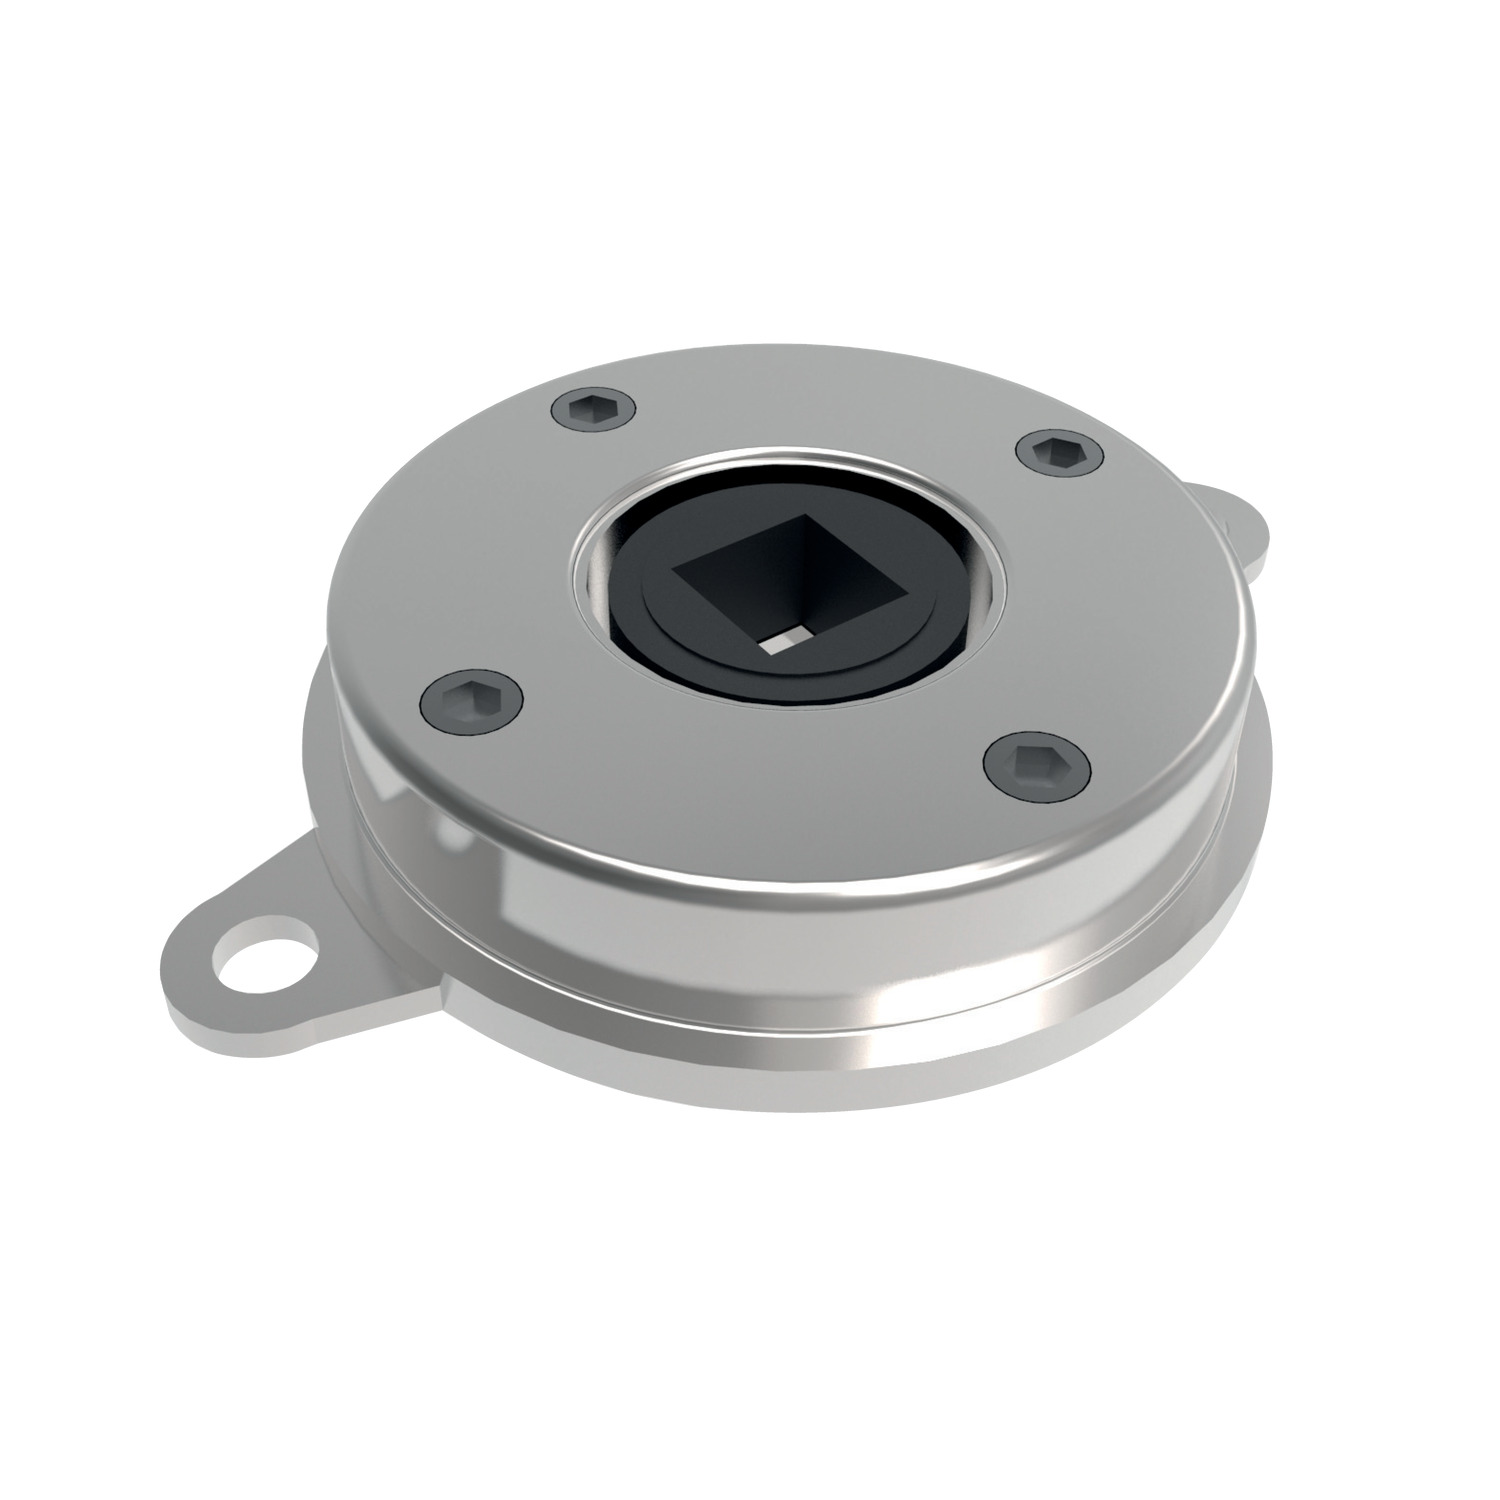 Disk Dampers Bi-directional disk dampers with continuous rotation in either clockwise or counter clockwise motions. Supports up to 47 Kgf.cm.